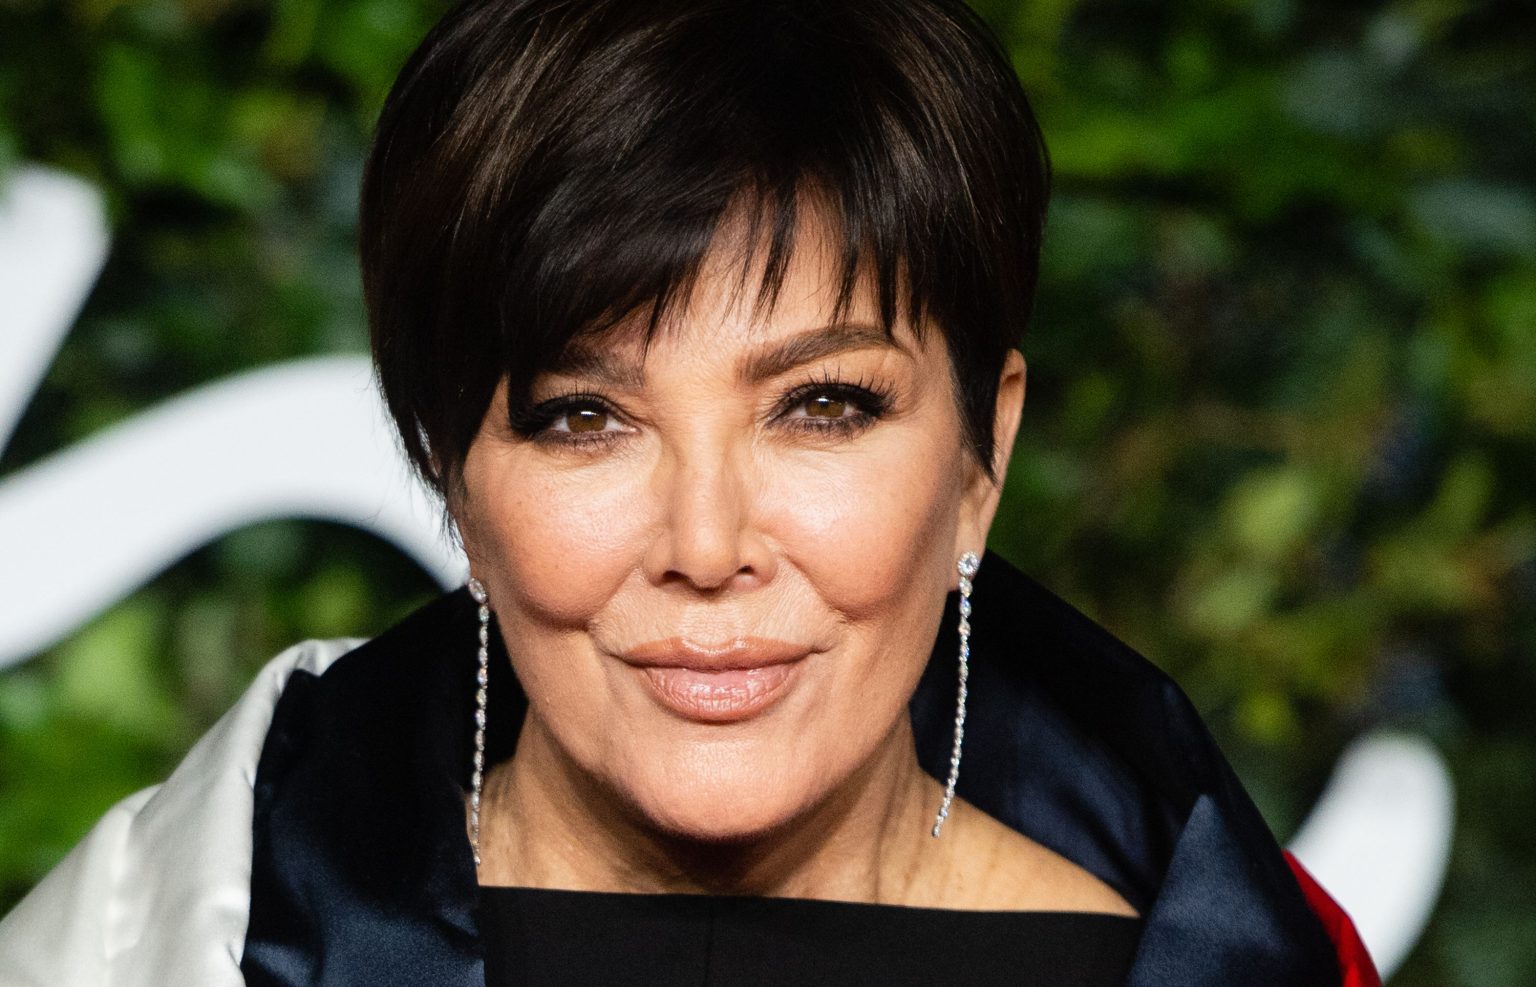 Kardashians Are Very Tactical Have No Room For Accidents Fans Accuse Kris Jenner Of